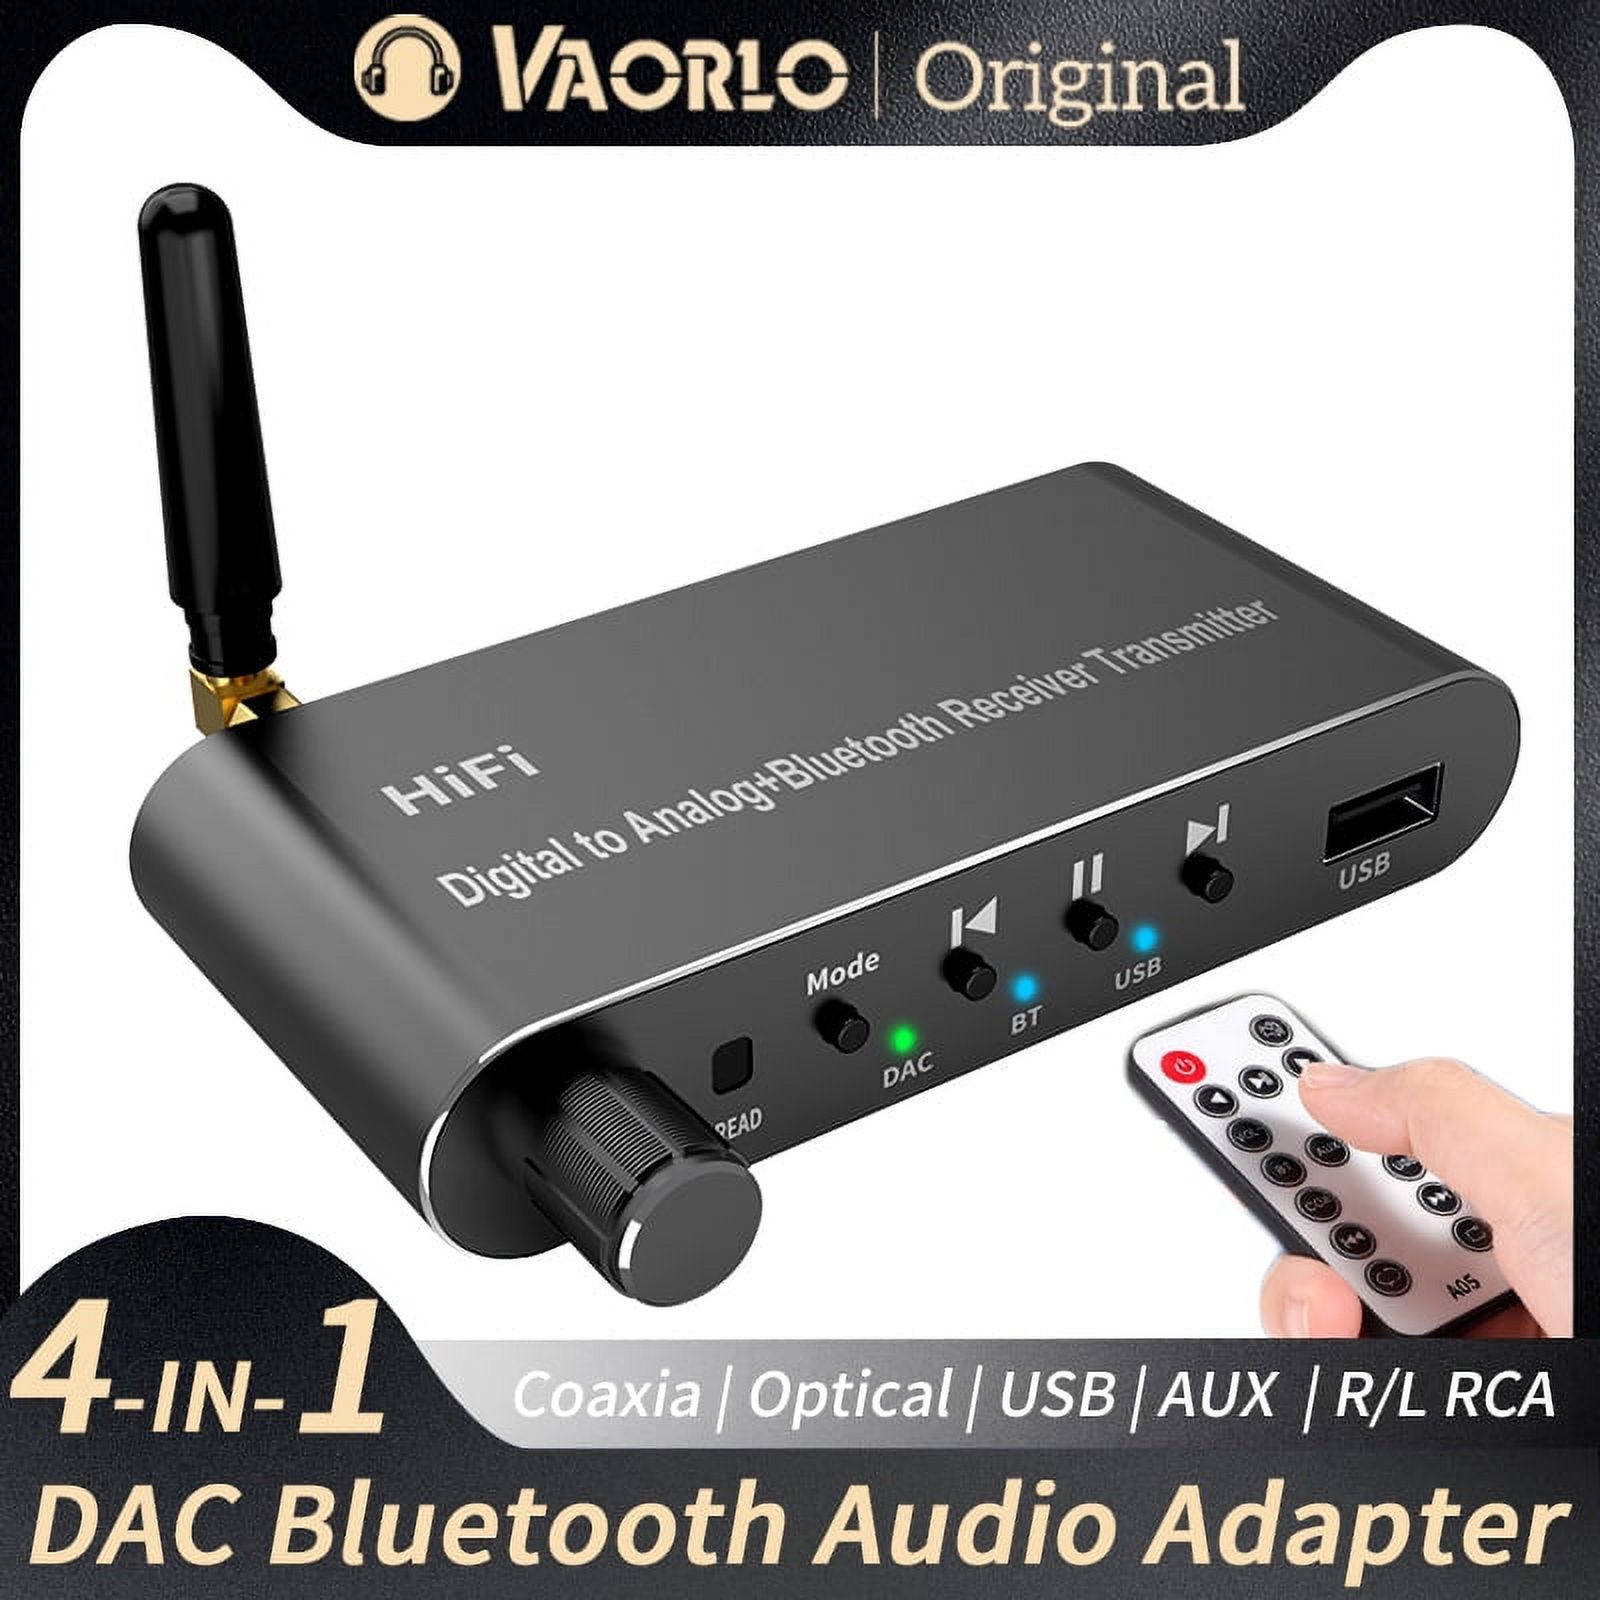 VAORLO 4-IN-1 DAC Bluetooth 5.1 Receiver Transmitter USB 3.5MM AUX R/L RCA Optical Coaxial U-Disk Wireless Audio Adapter Digital to Analog Audio Converter With Remote Control For TV PC Car Amplifier - image 1 of 8